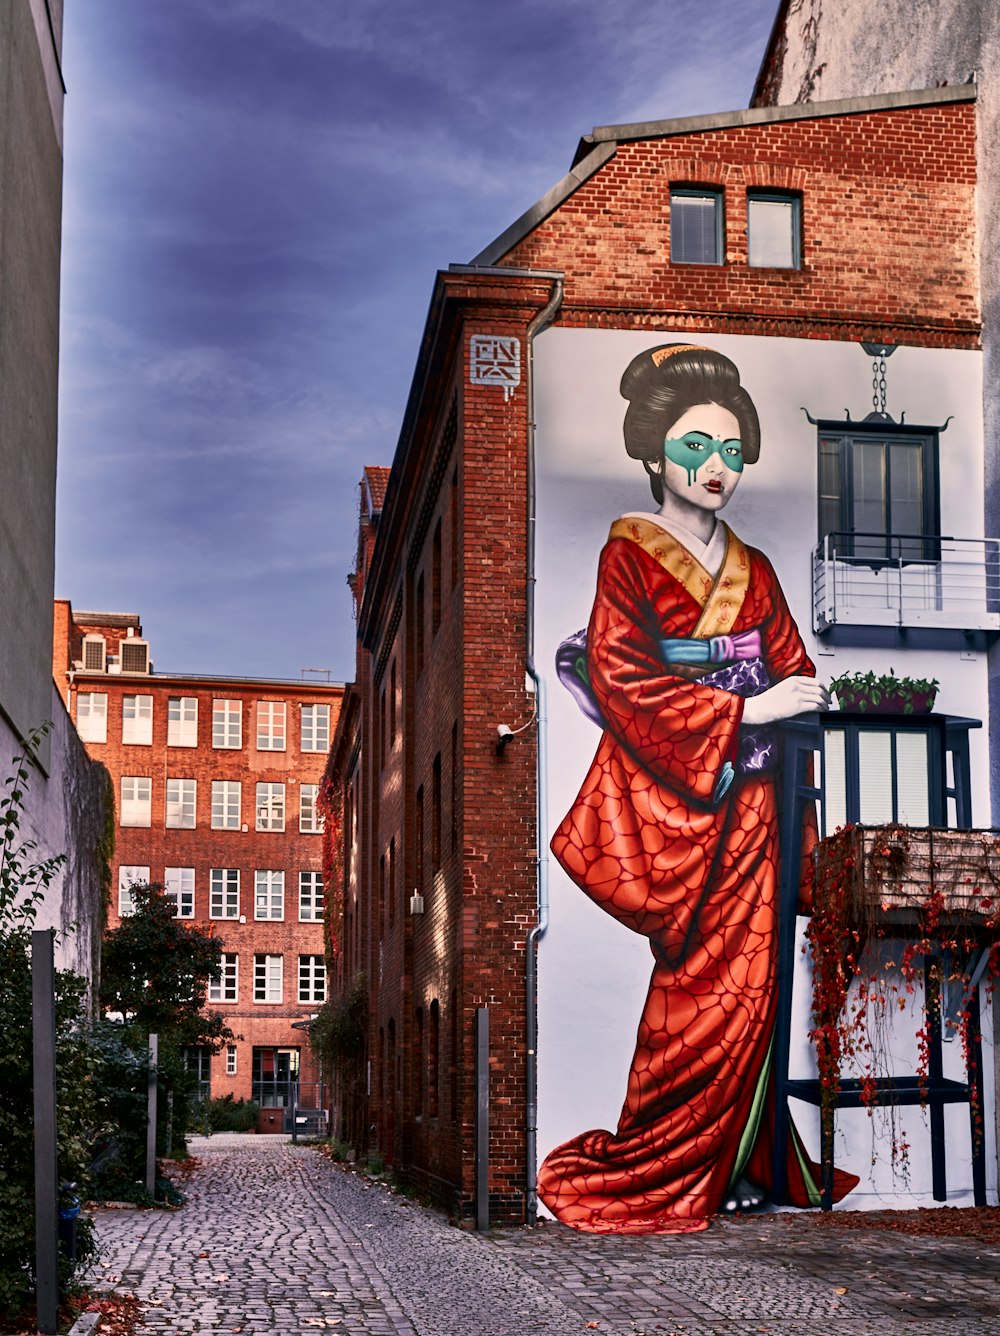 a painting of a person in a red robe and sunglasses on a brick building